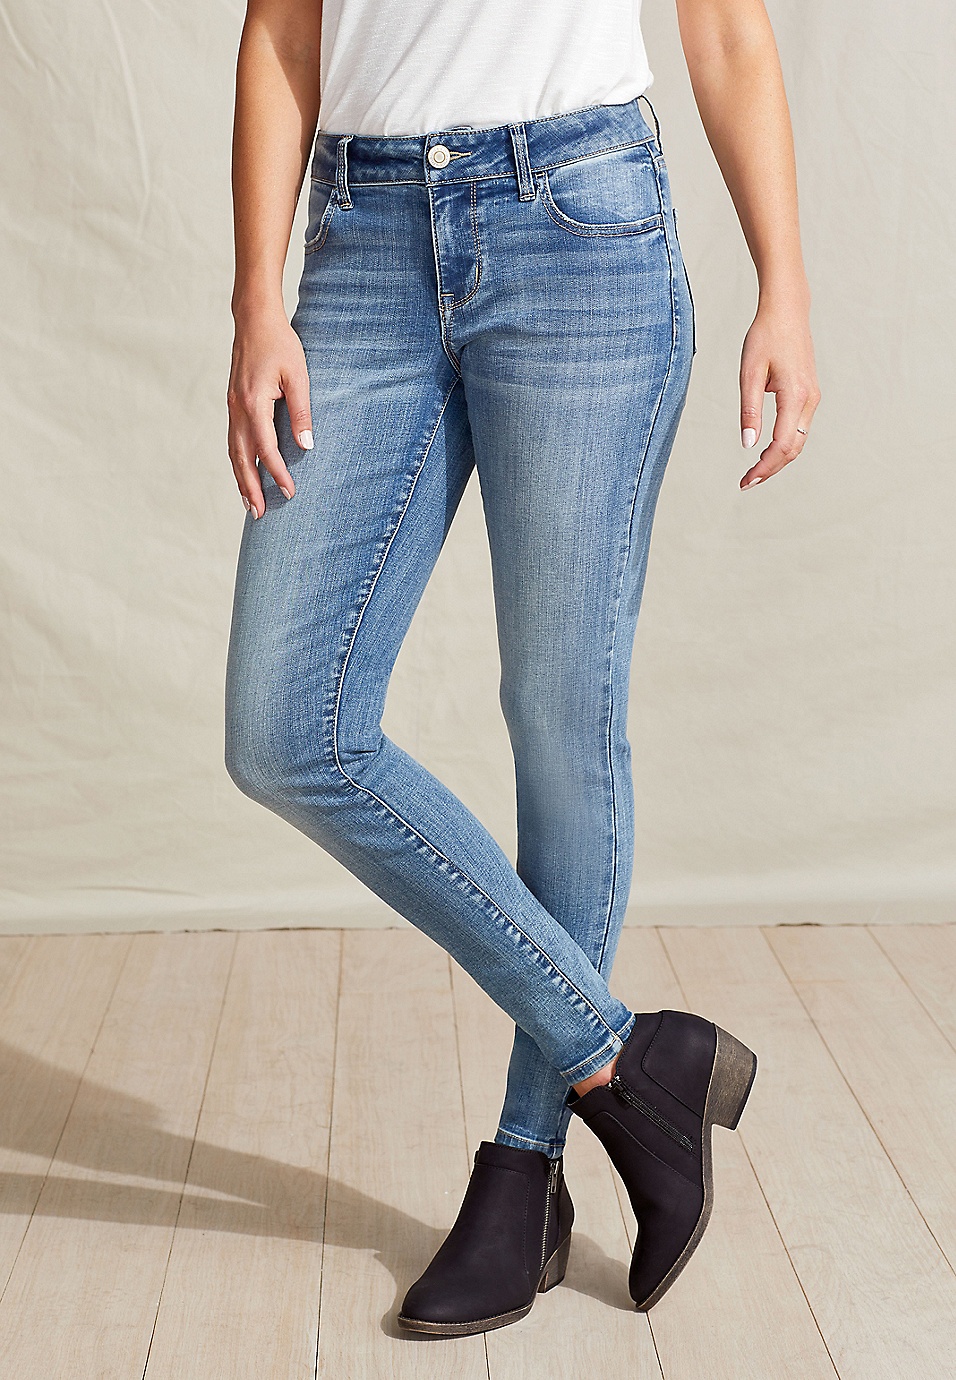 m jeans by maurices™ Cool Comfort Pull On Super High Rise Jegging